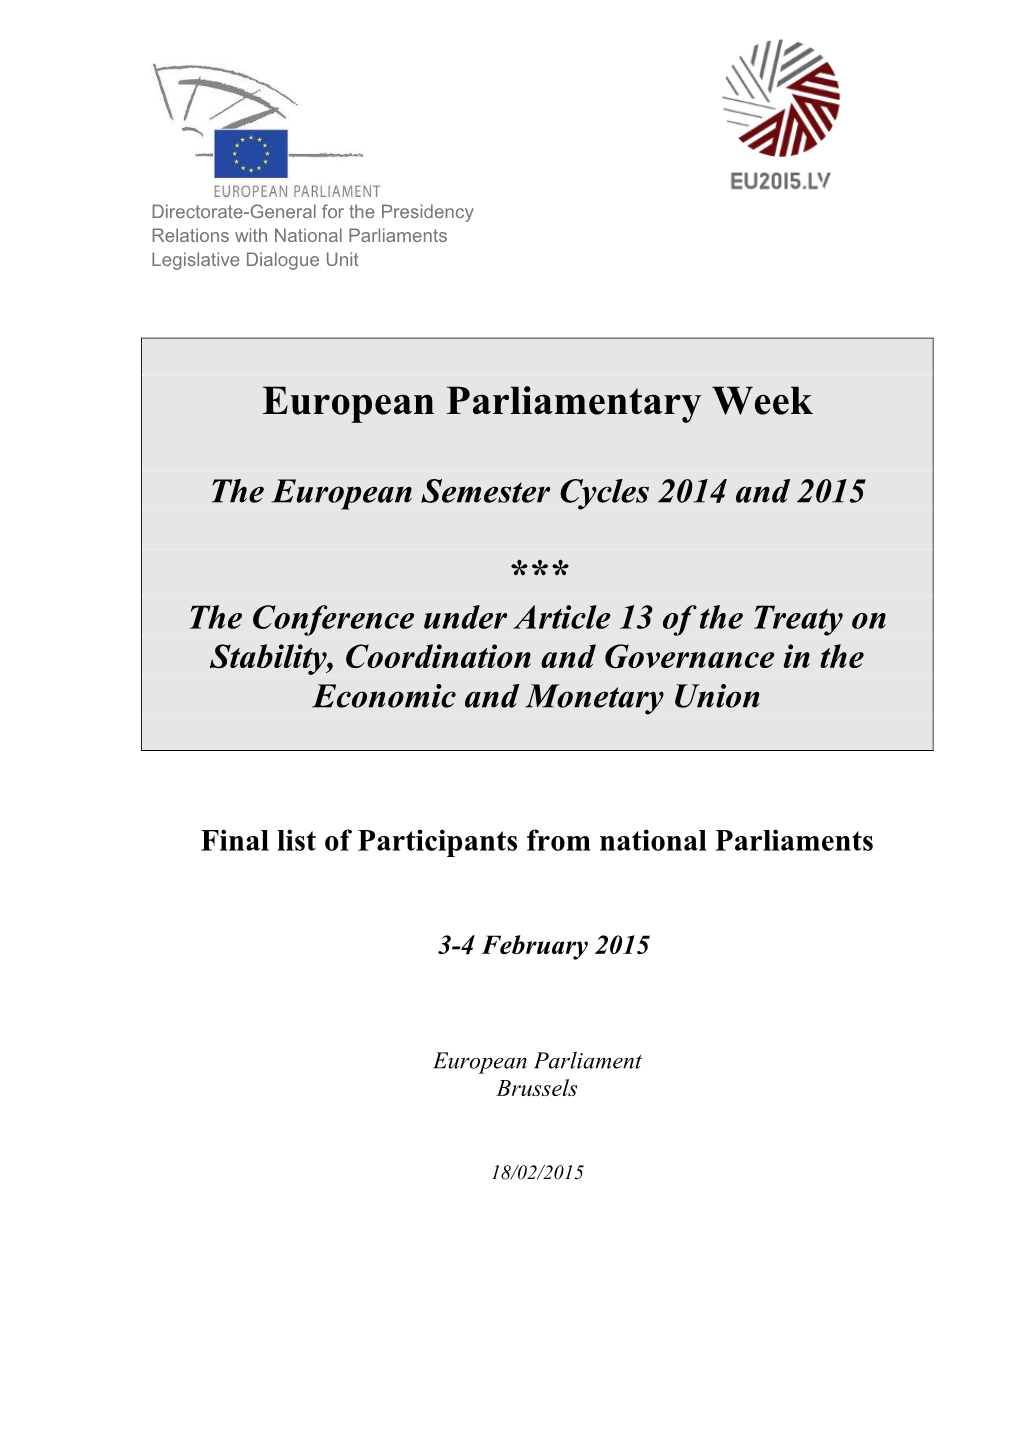 Committee on Finance and Budget CD&V - EPP